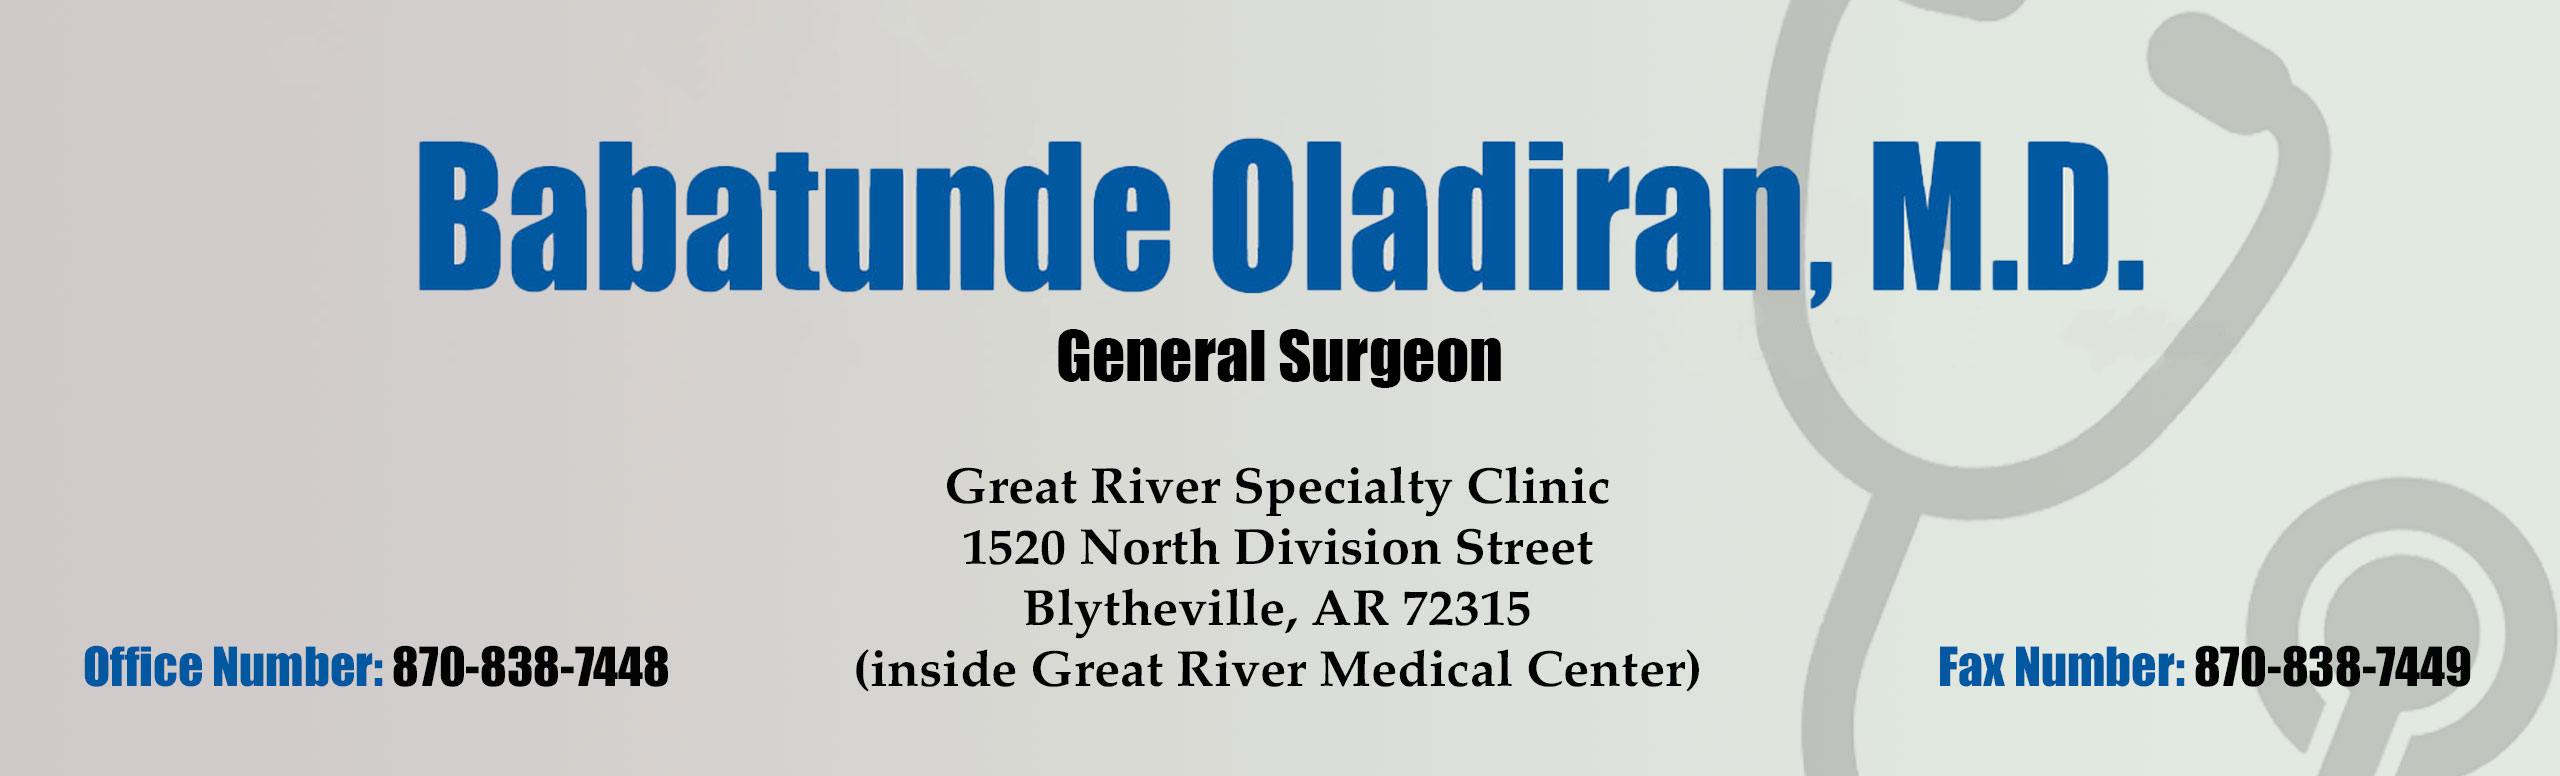 Join us in welcoming.. 
Babatunde Oladiran, M.D.
as the newest member of our general surgery staff at Mississippi County Hospital System.